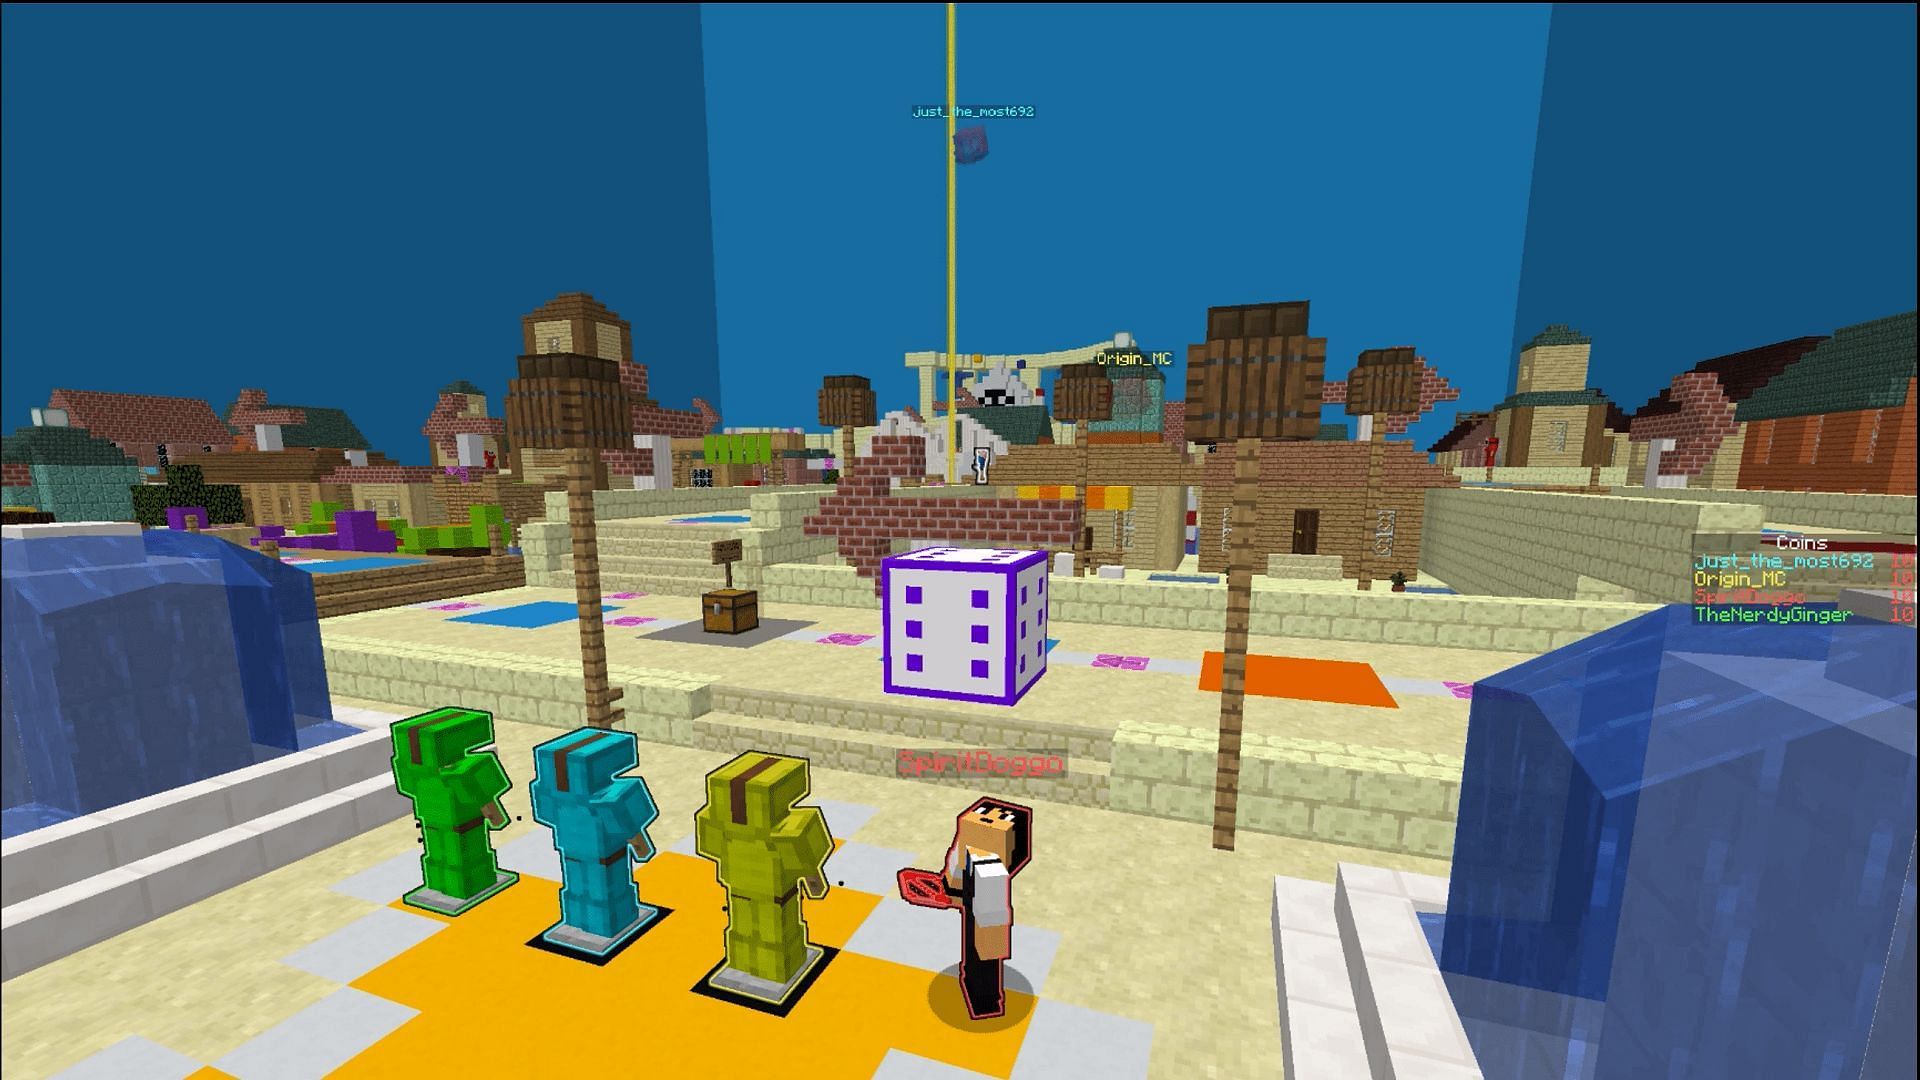 A Minecraft player prepares to roll the dice in Super Voxel Party (Image via Origin_MC, TheNerdyGinger)